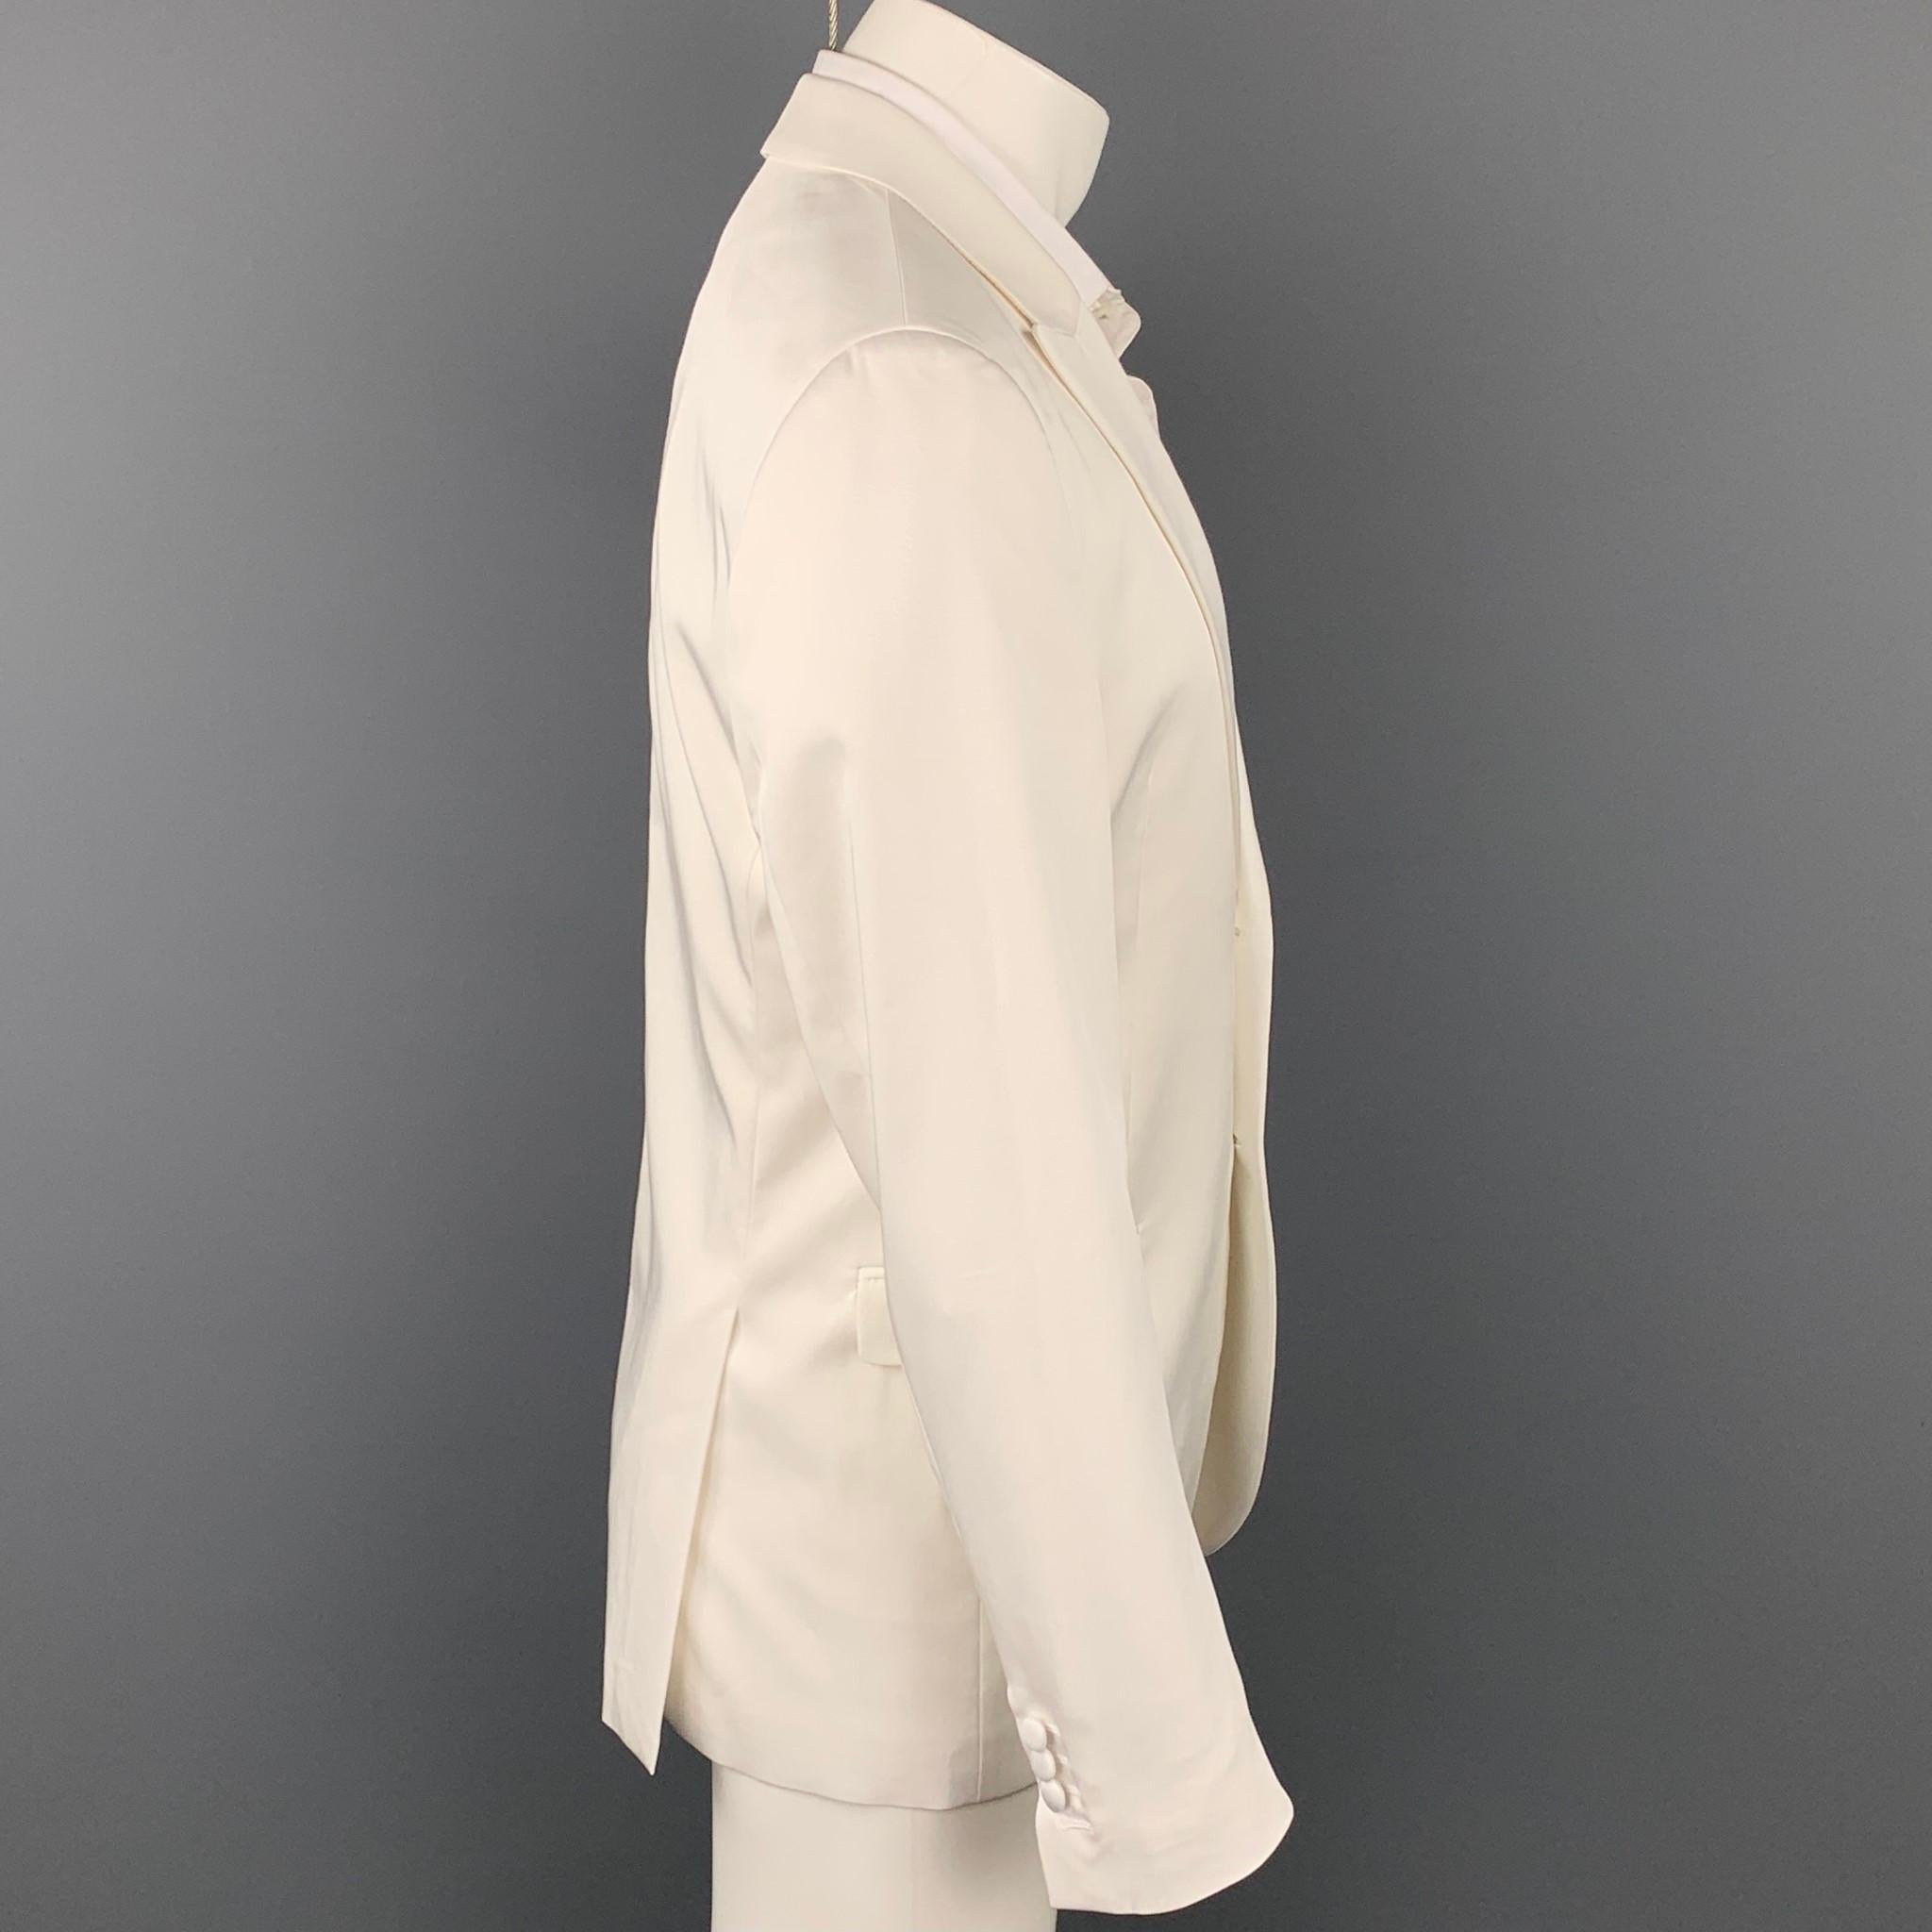 NEIL BARRETT sport coat comes in a white tencel blend with a full liner featuring a peak lapel, flap pockets, and a two button closure. Made in Italy.

Very Good Pre-Owned Condition.
Marked: IT 50

Measurements:

Shoulder: 18 in.
Chest: 40